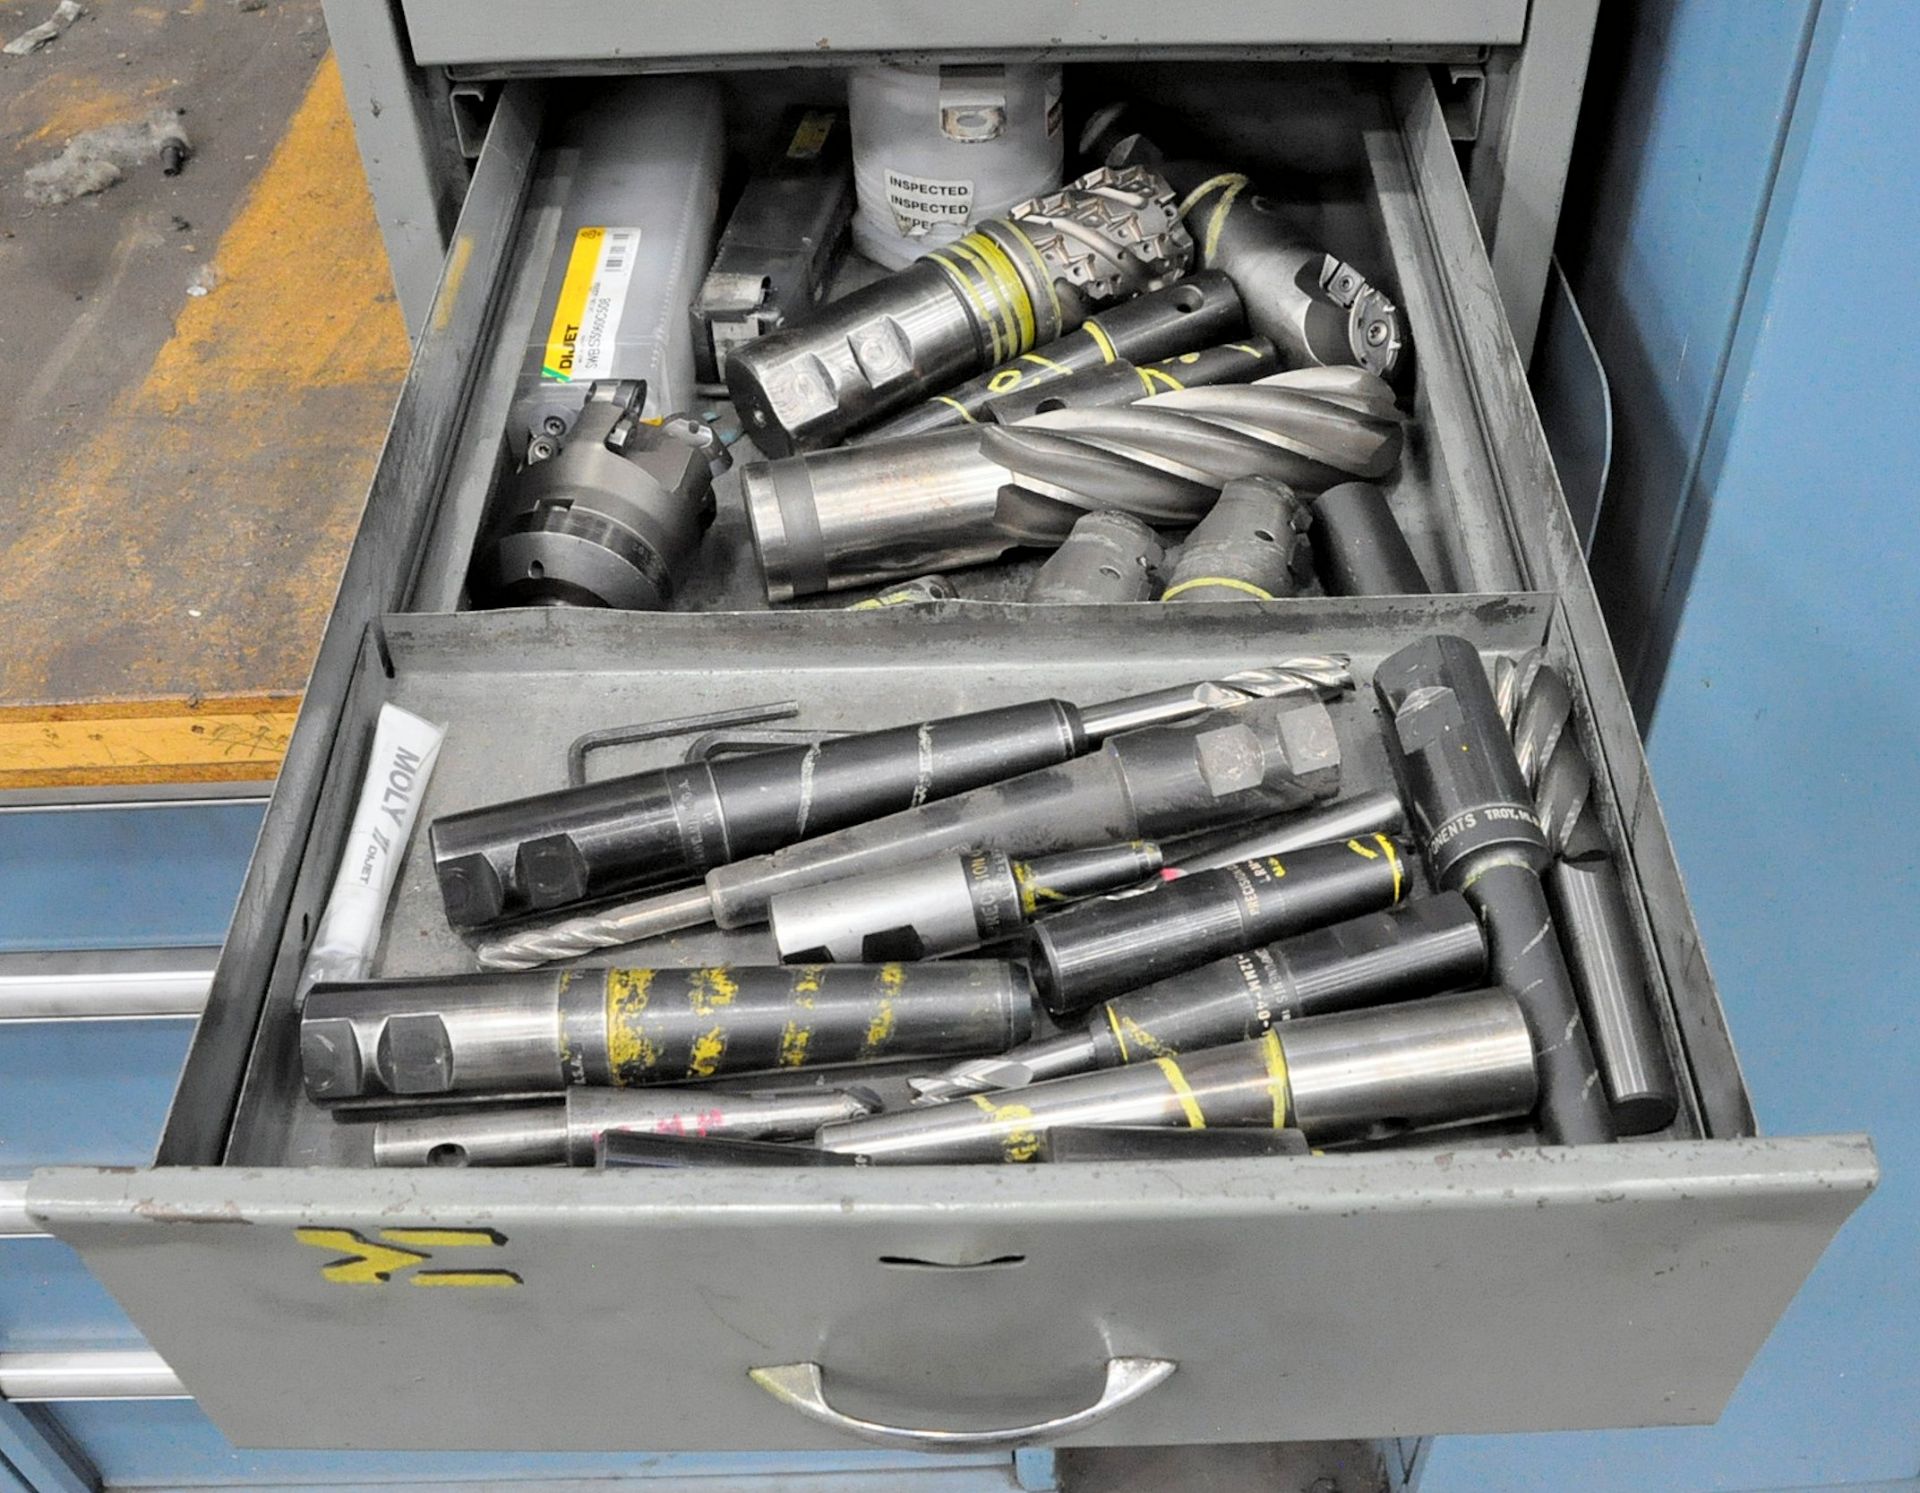 Lot-(1) 4-Drawer Cabinet with Various Metric Cutters and Inserts Contents, (A-24), (Yellow Tag) - Image 2 of 5